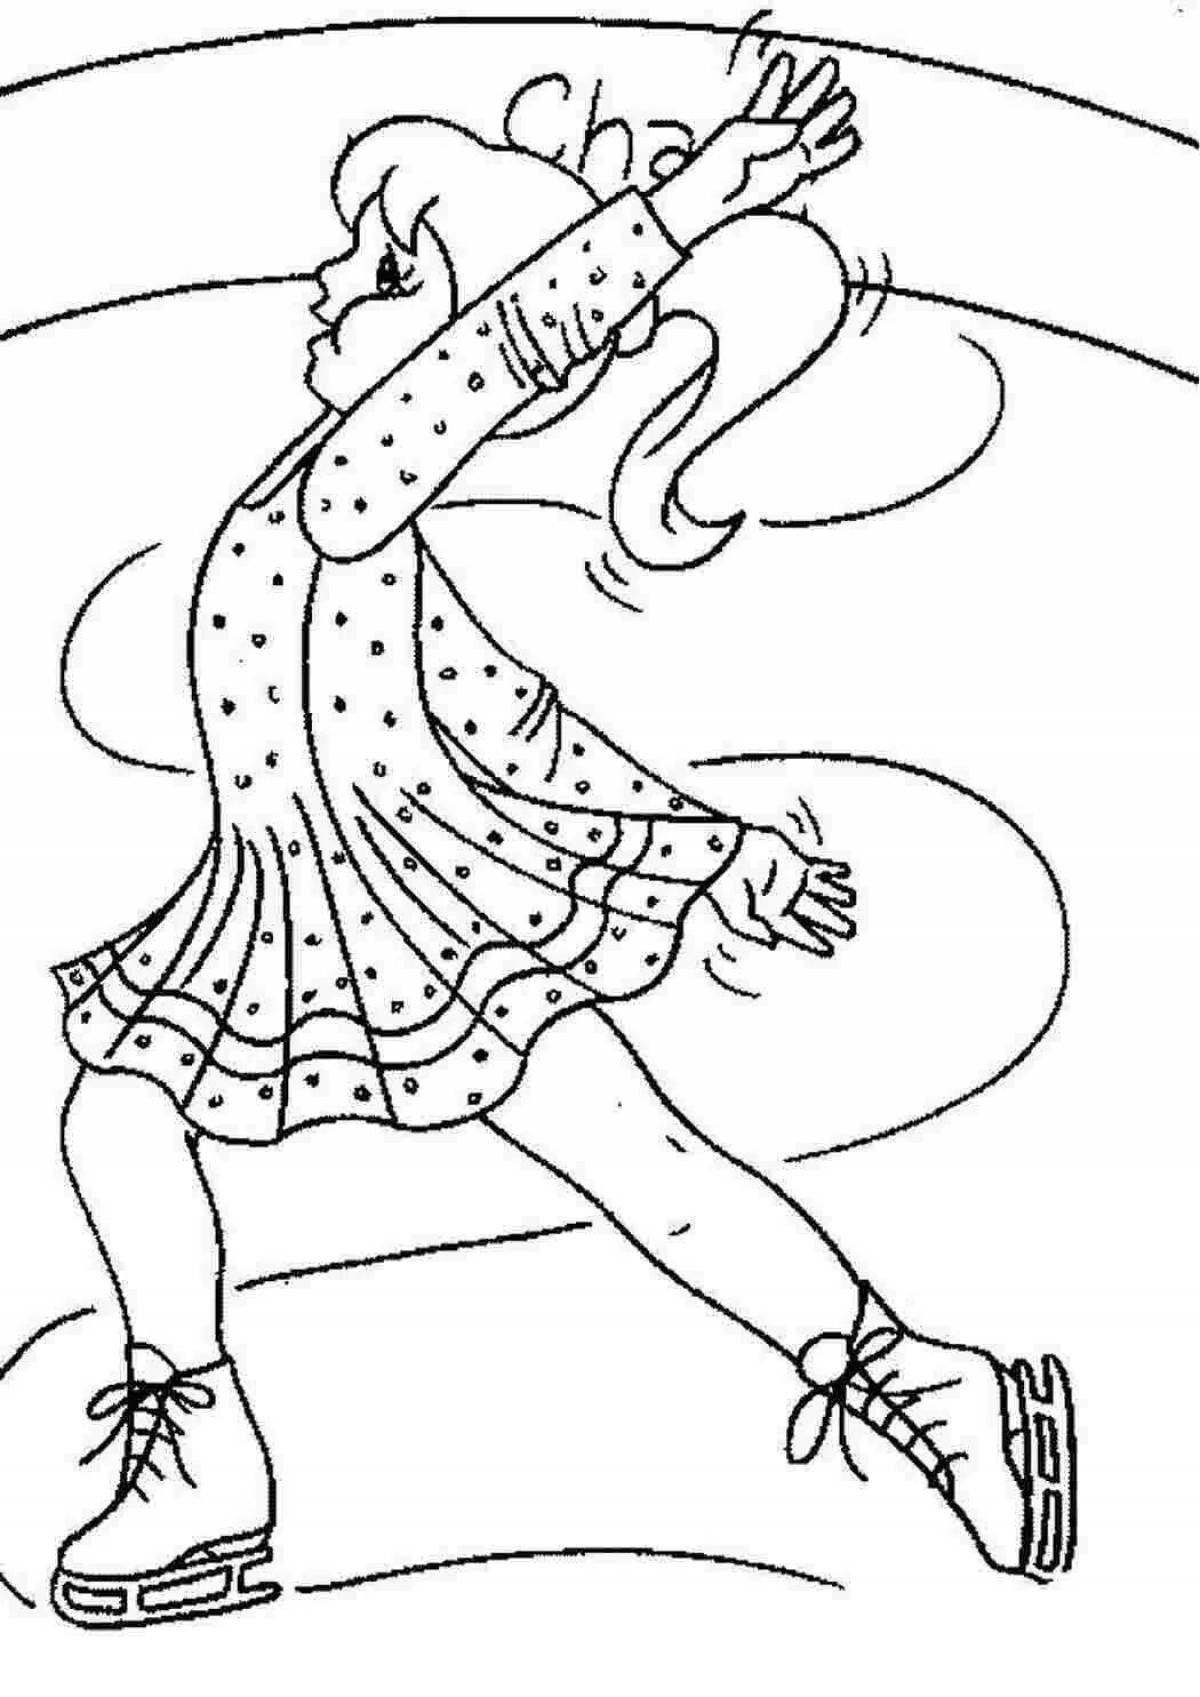 Coloring page of a cheerful girl on skates